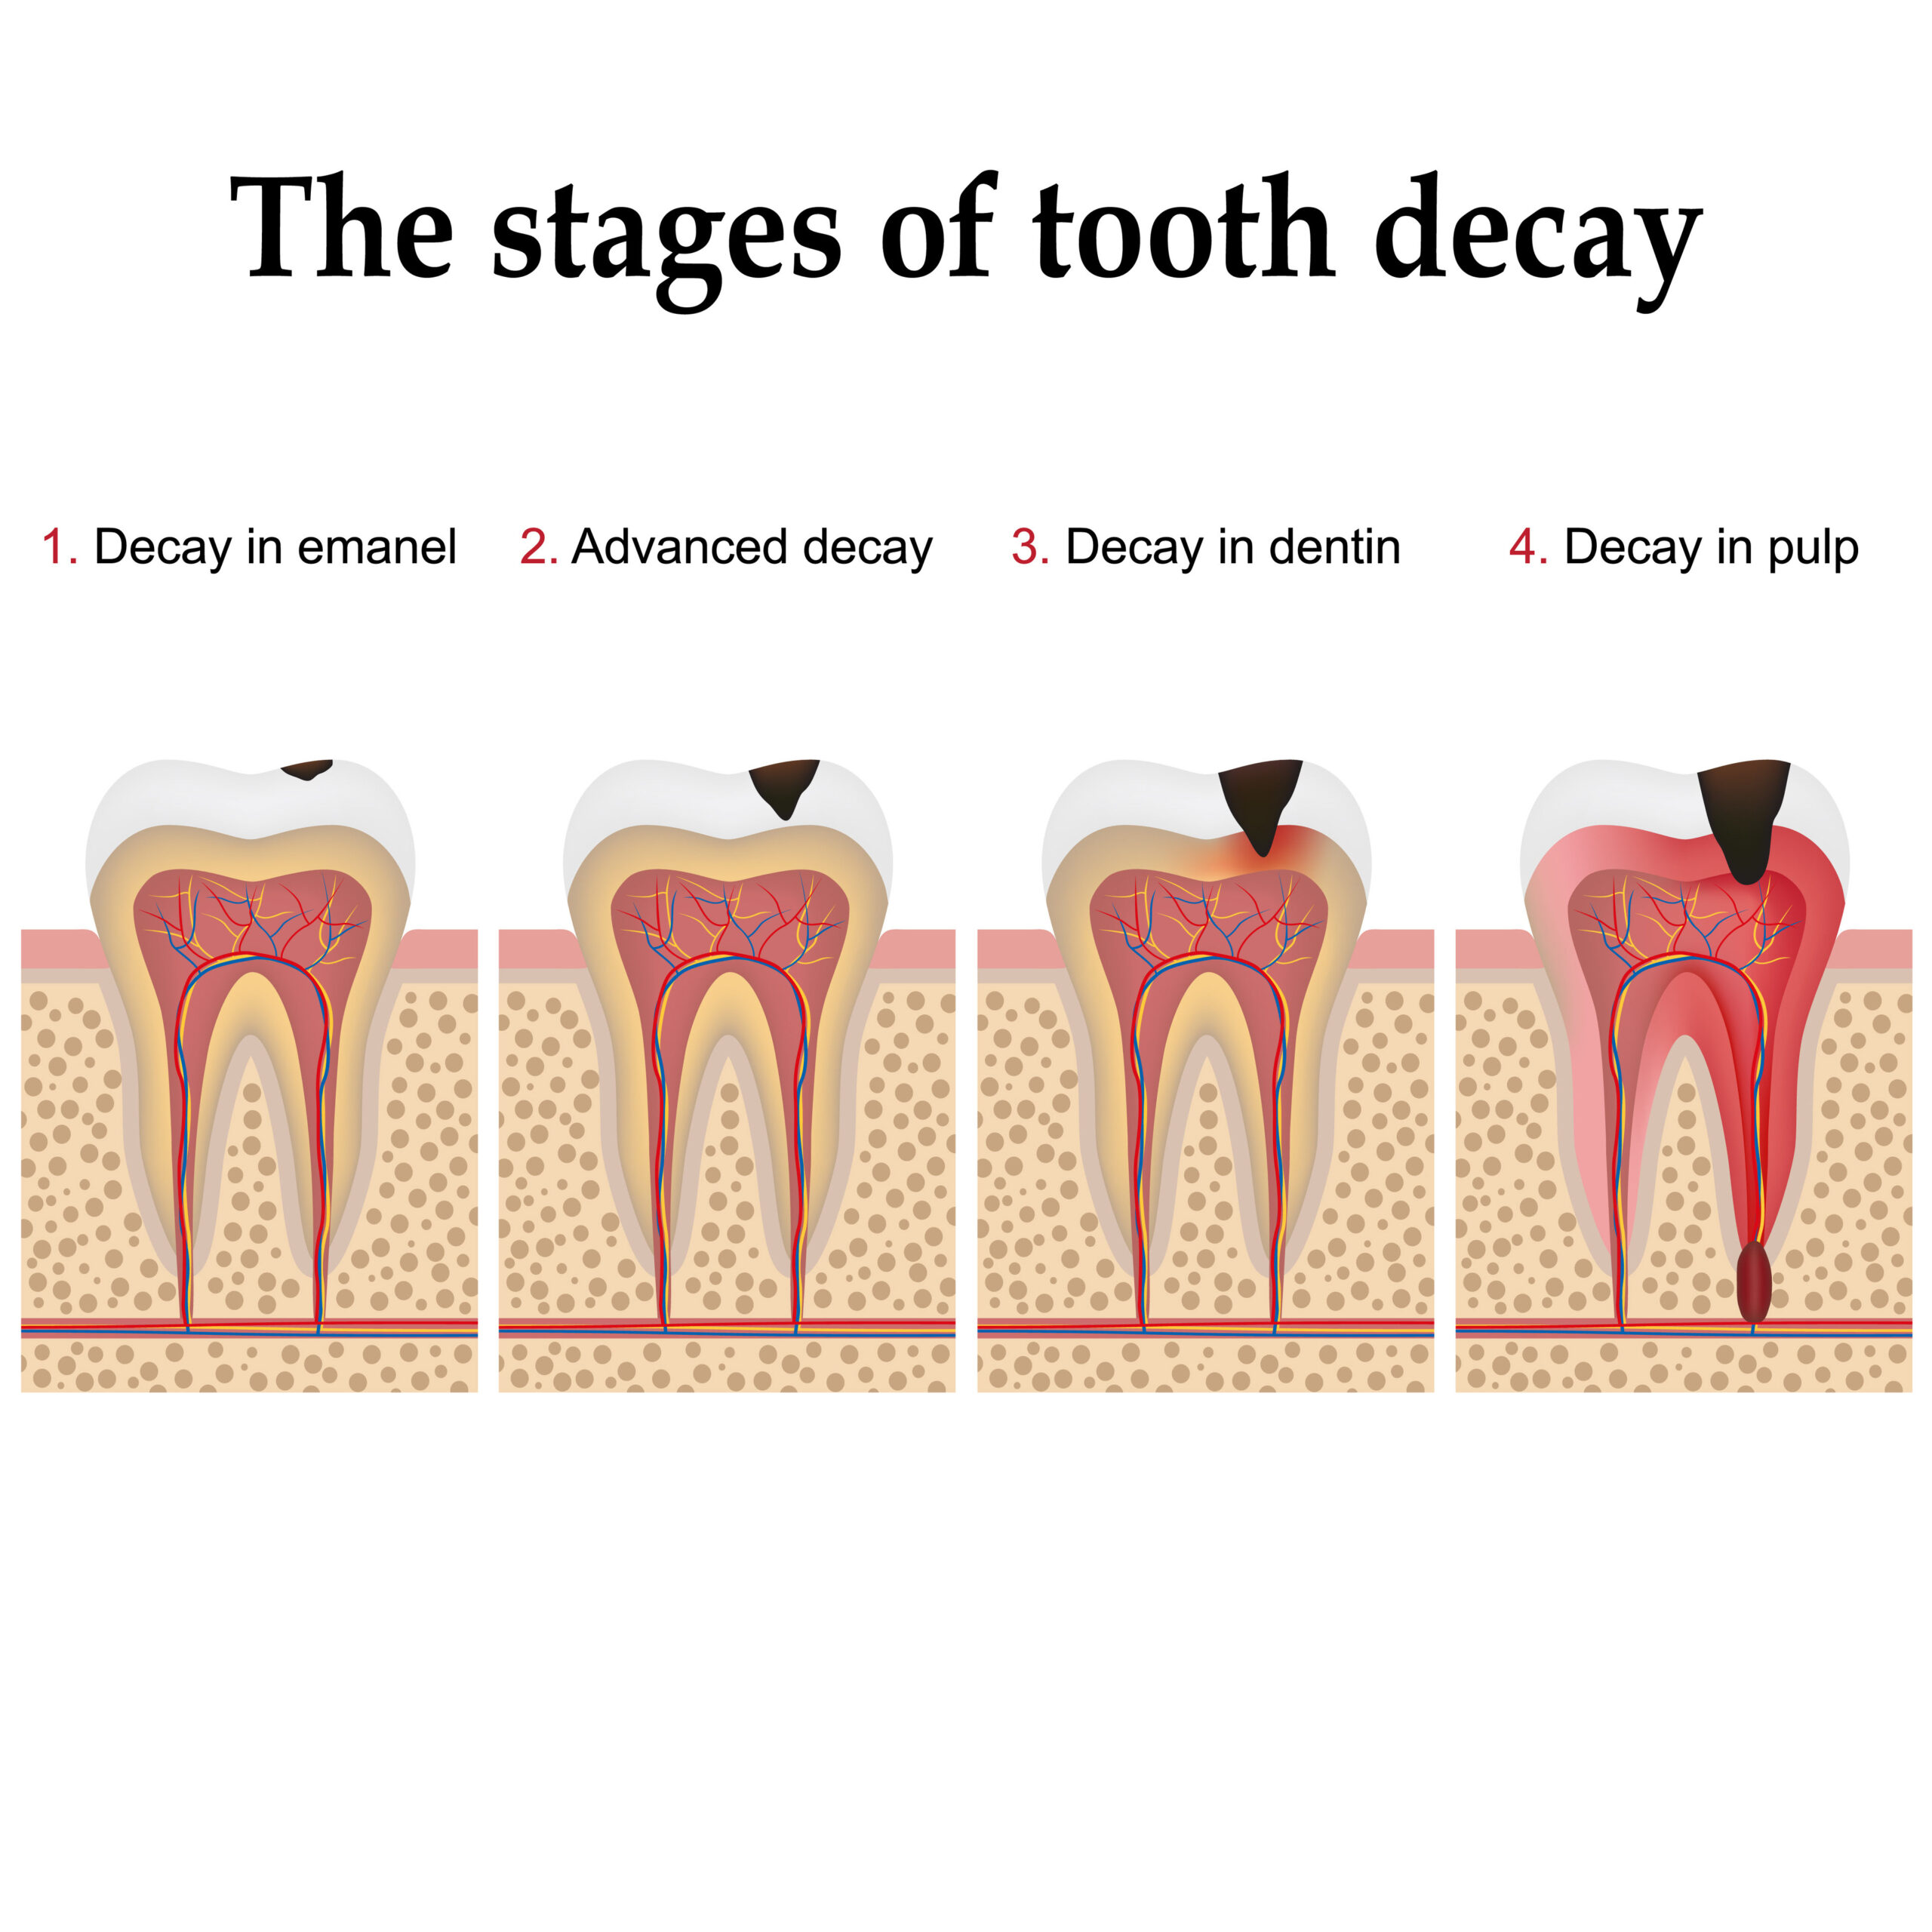 Image of dental caries (tooth decay) formation step by step, forming dental plaque and finally caries and cavity.